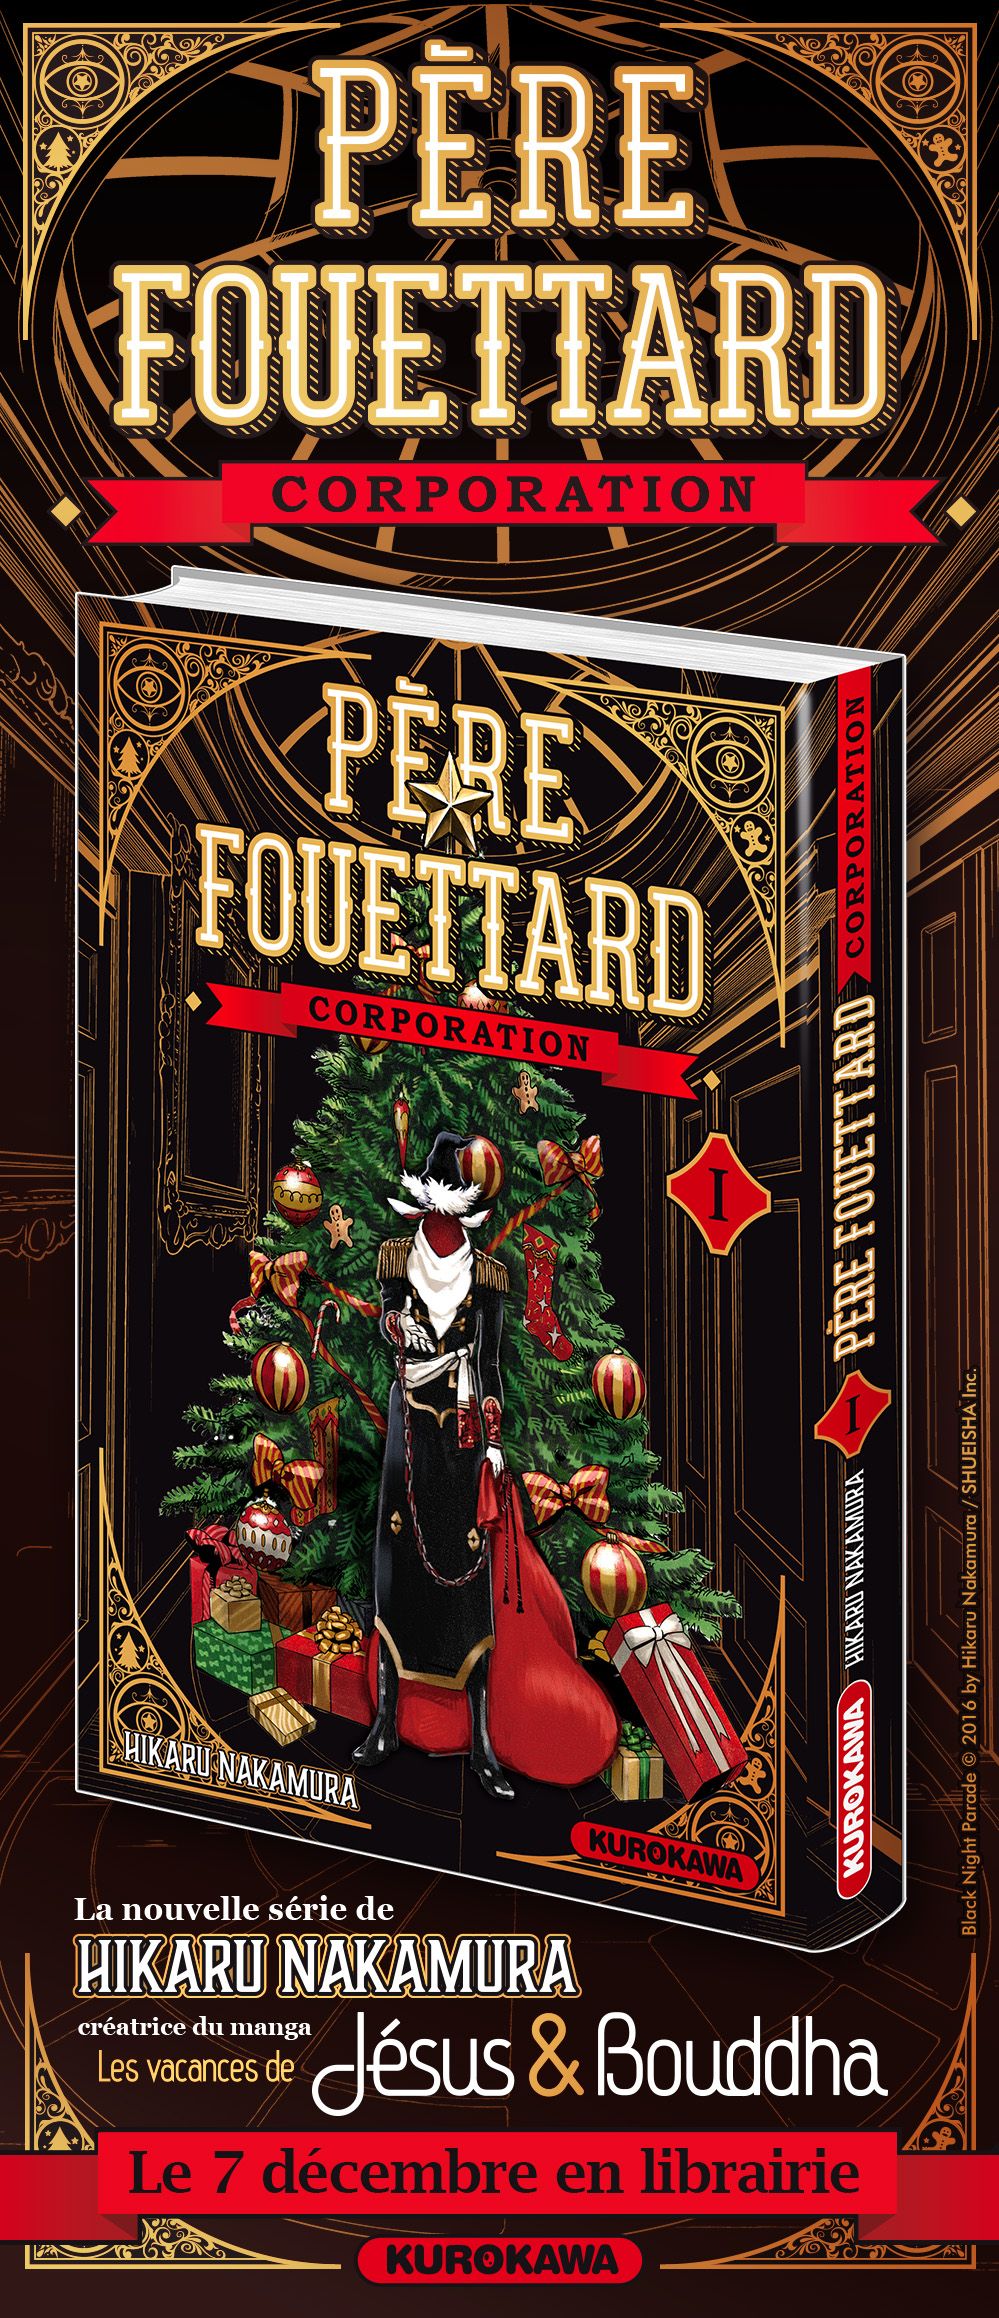 Annonce_Pere_Fouettard